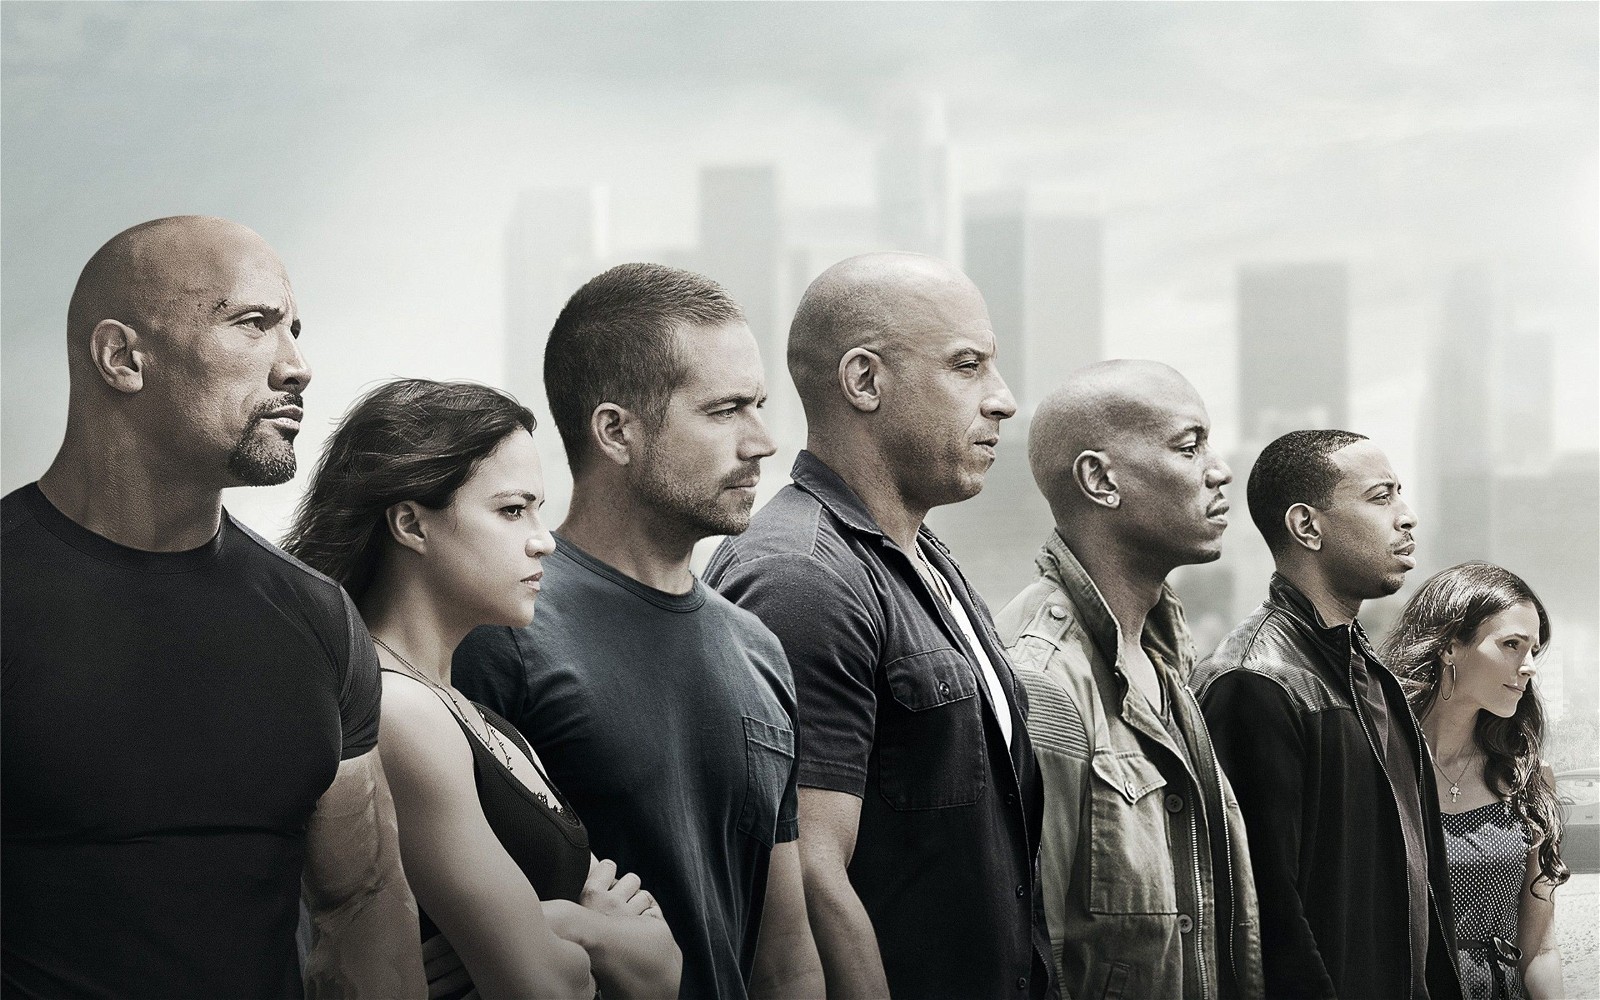 Poster from Furious 7 